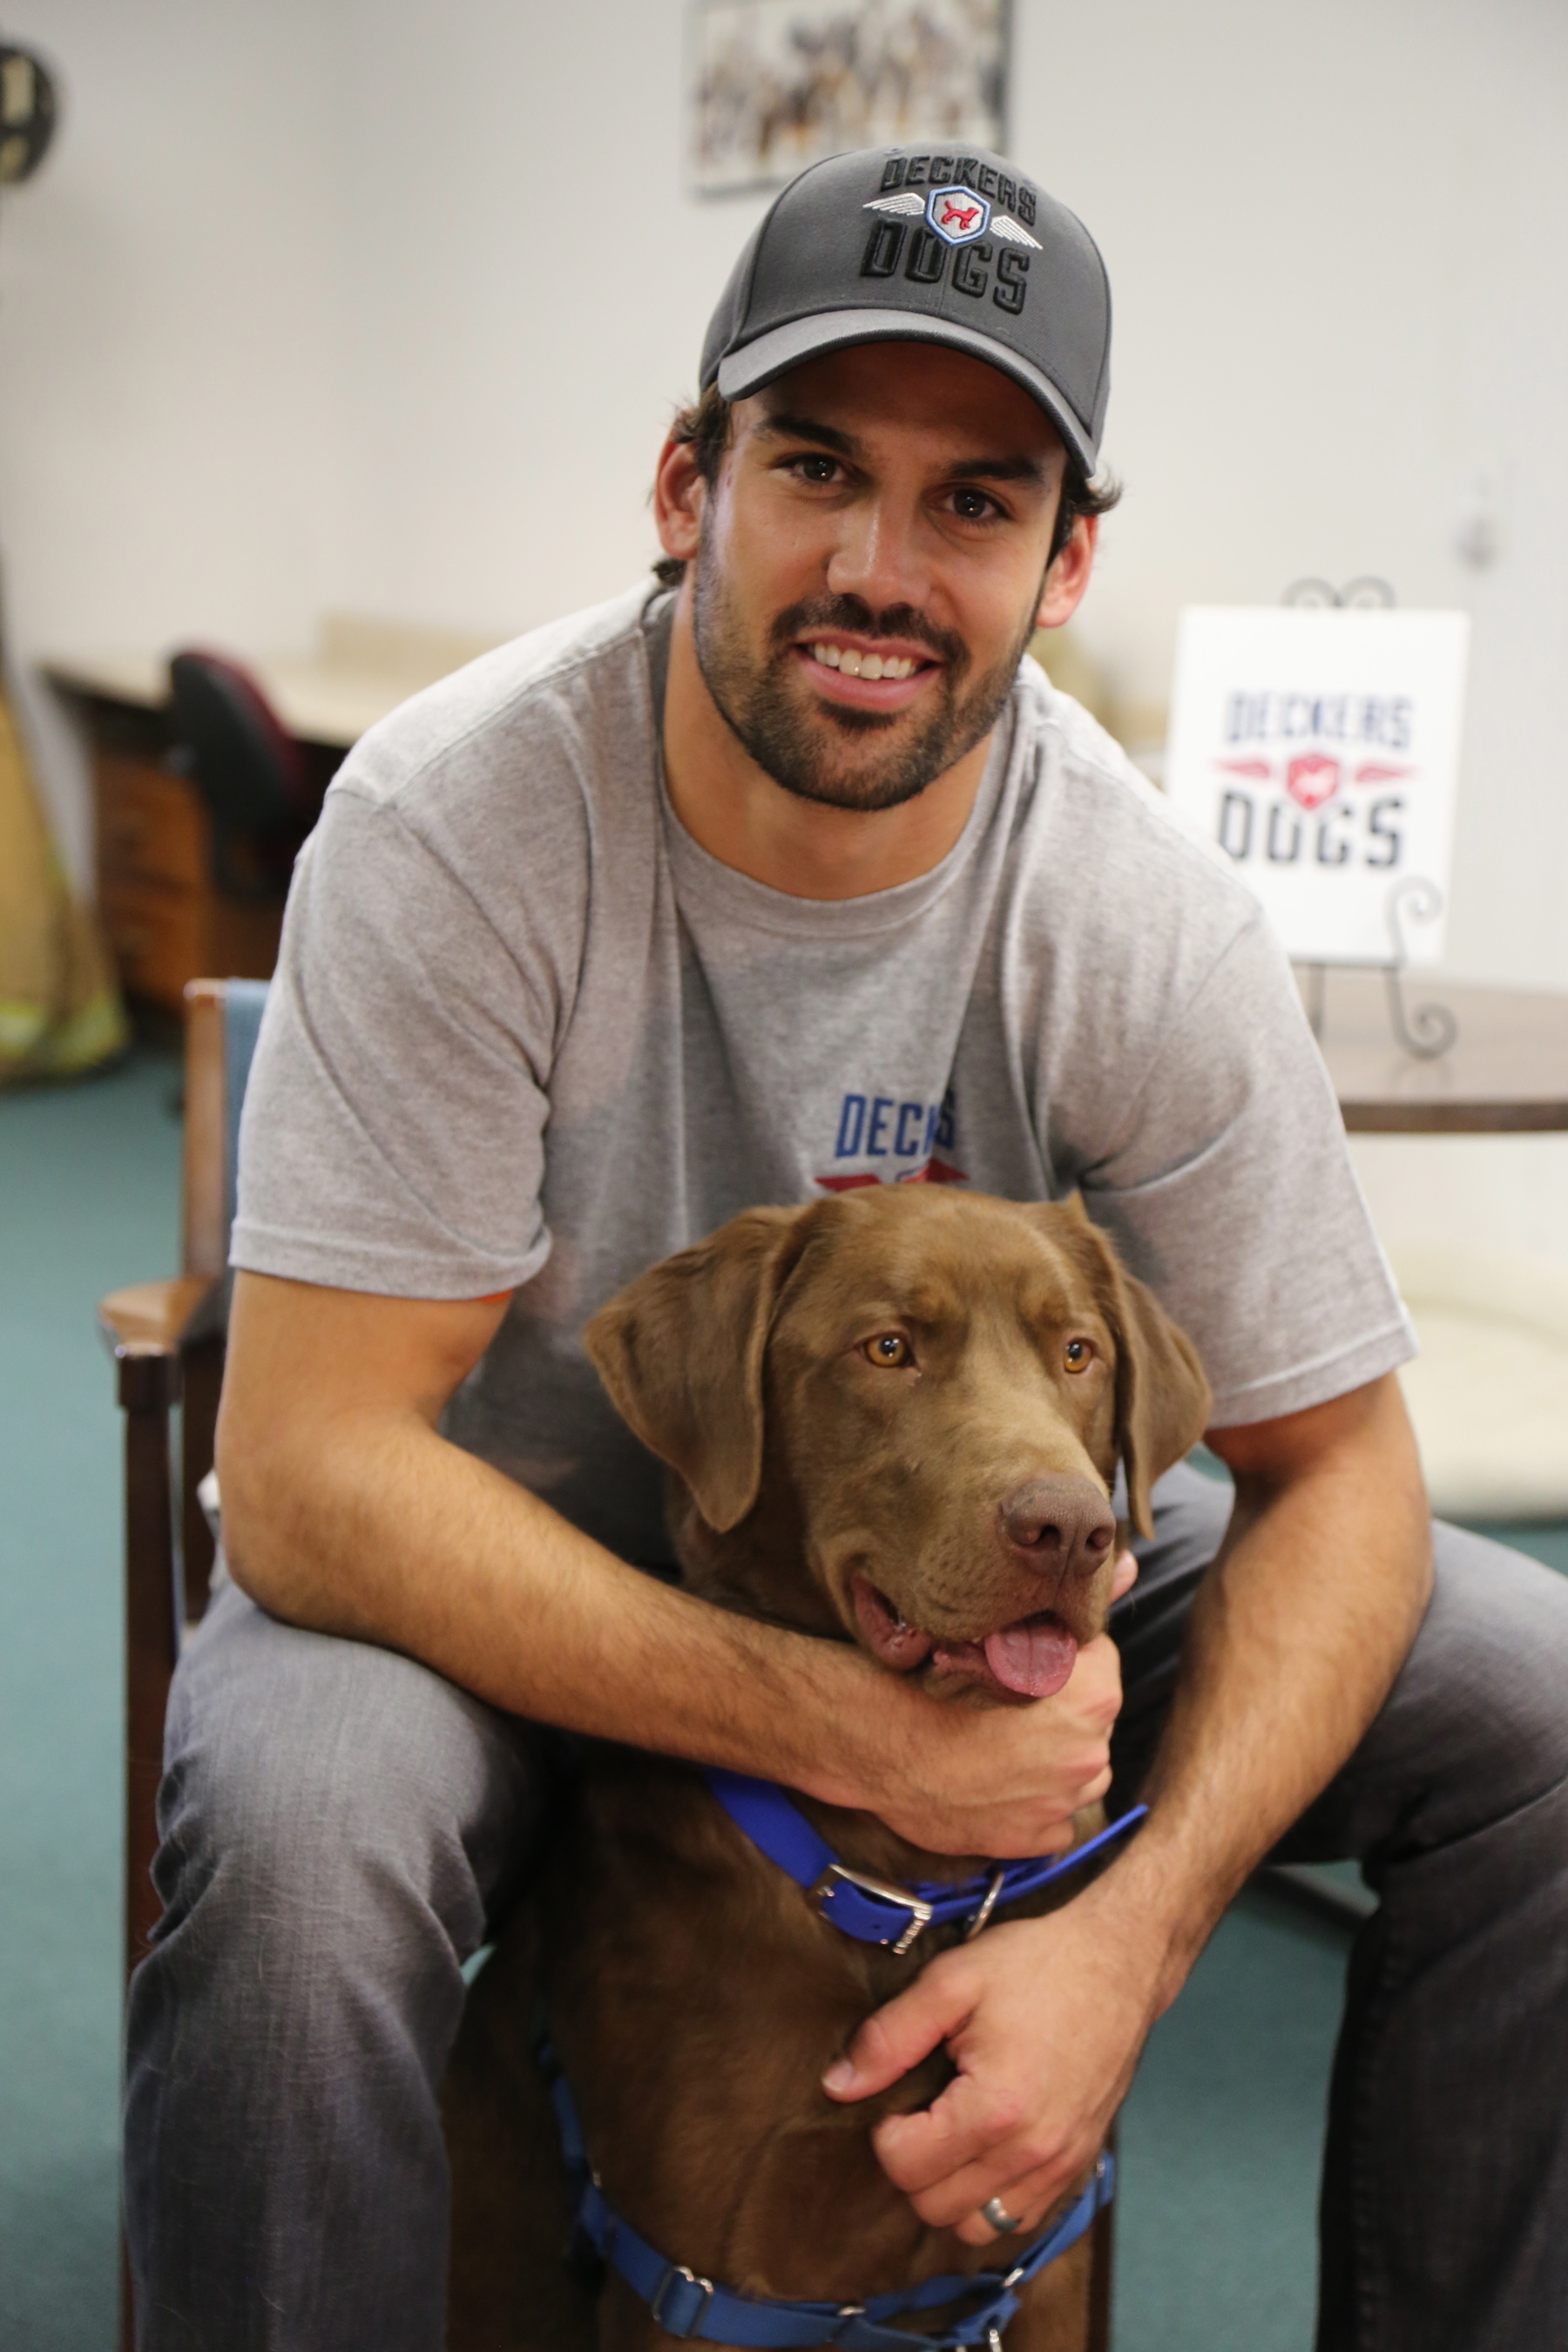 NY Jets' Eric Decker and "Deckers Dogs" team with Veterinary Pet Insurance (VPI) to celebrate Pet Parent's Day. For every new quote generated at petparentsday.com through Memorial Day (May 25), VPI will donate $5 to Deckers Dogs to help fund the rescue, care and training of service dogs for our military veterans returning home with disabilities.